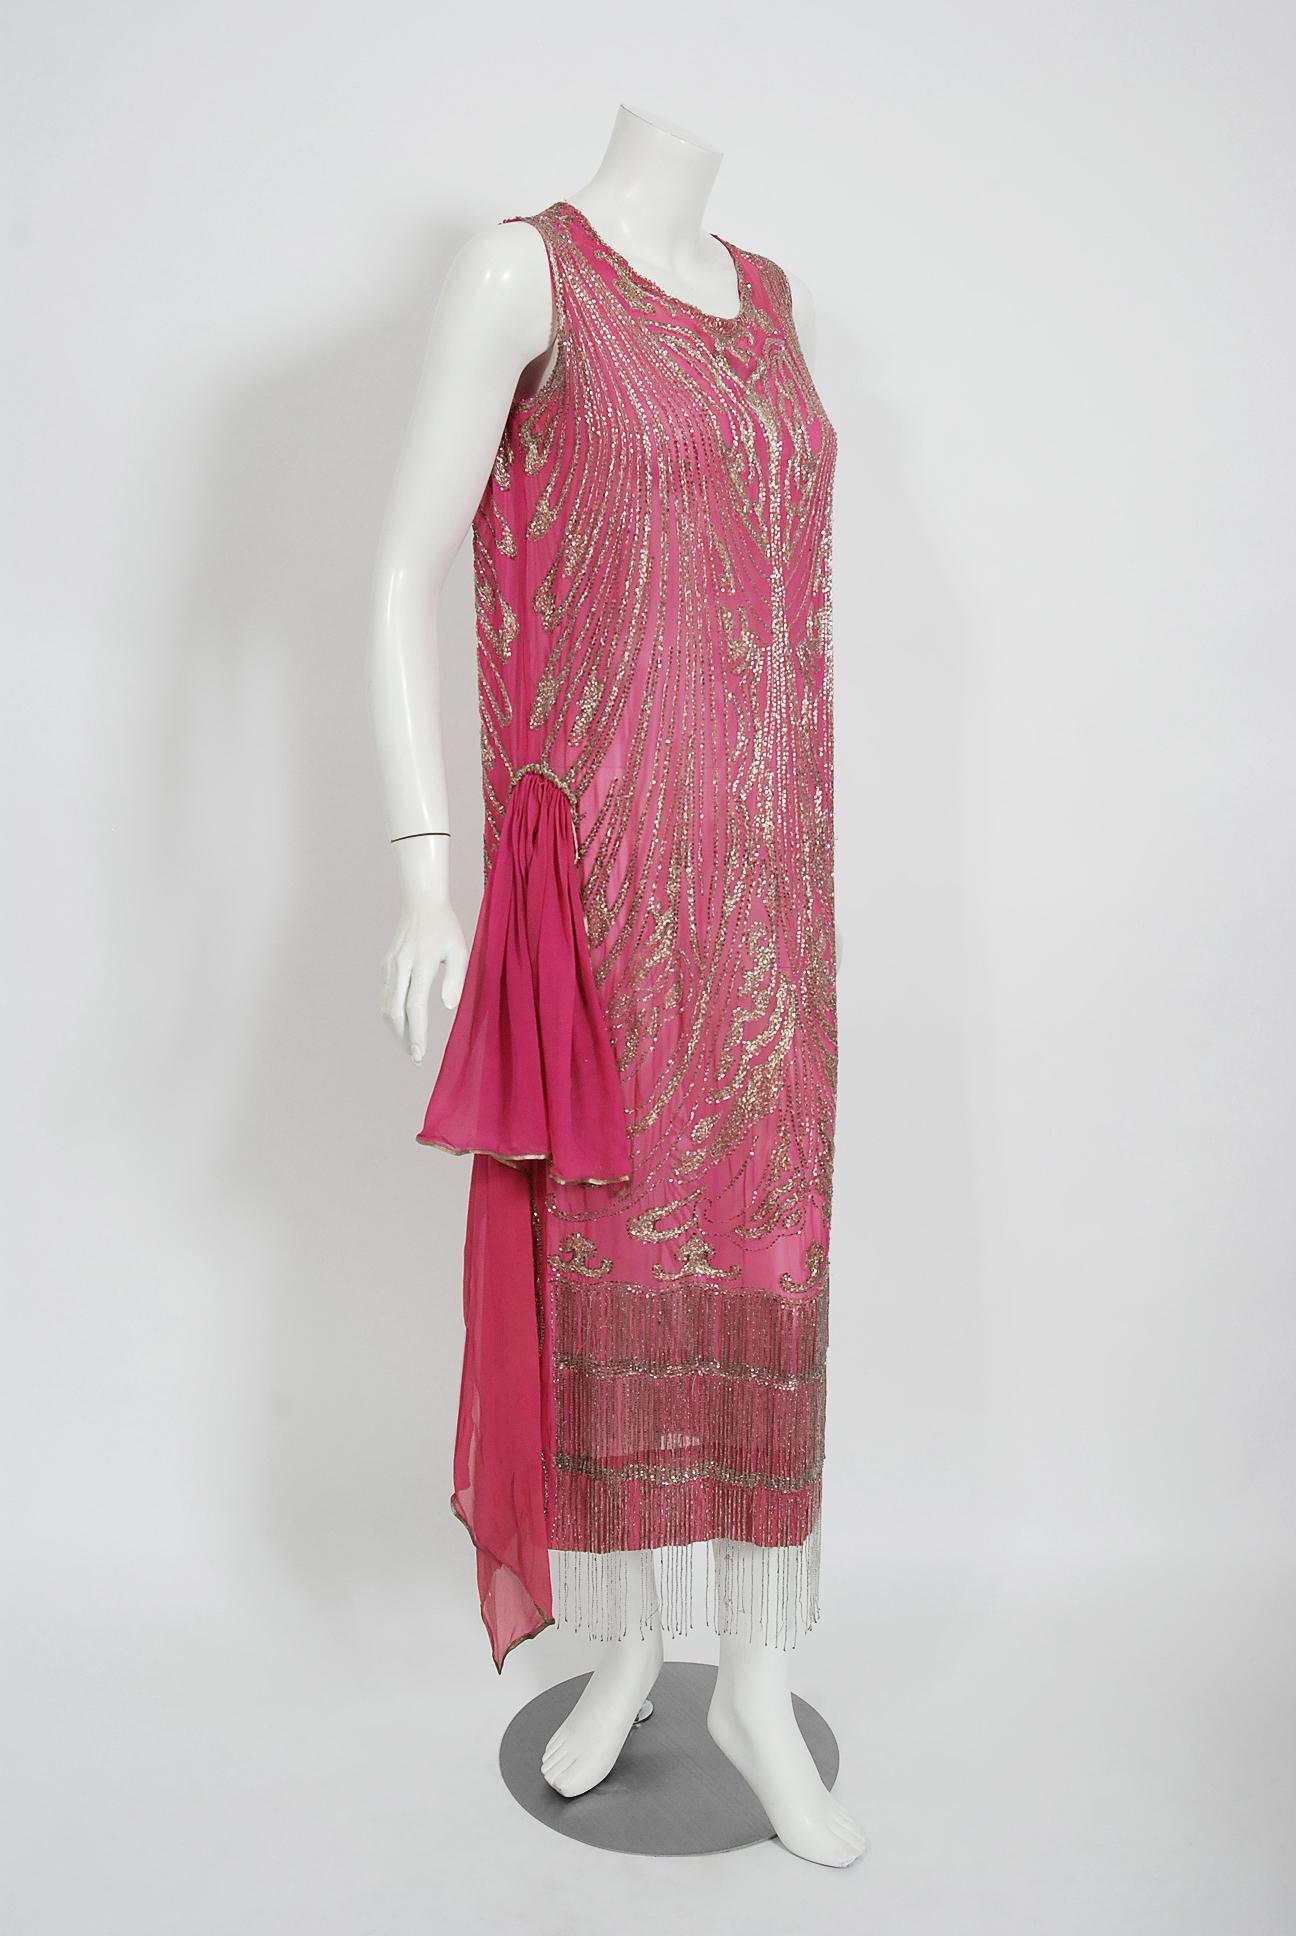 Undiminished by time, this 1920's fuchsia-pink flapper dance dress still casts its magical spell. This exceptional French beauty is fashioned in silk chiffon with lavish metallic silver embroidery and beading. I adore the bold art-deco motif worked